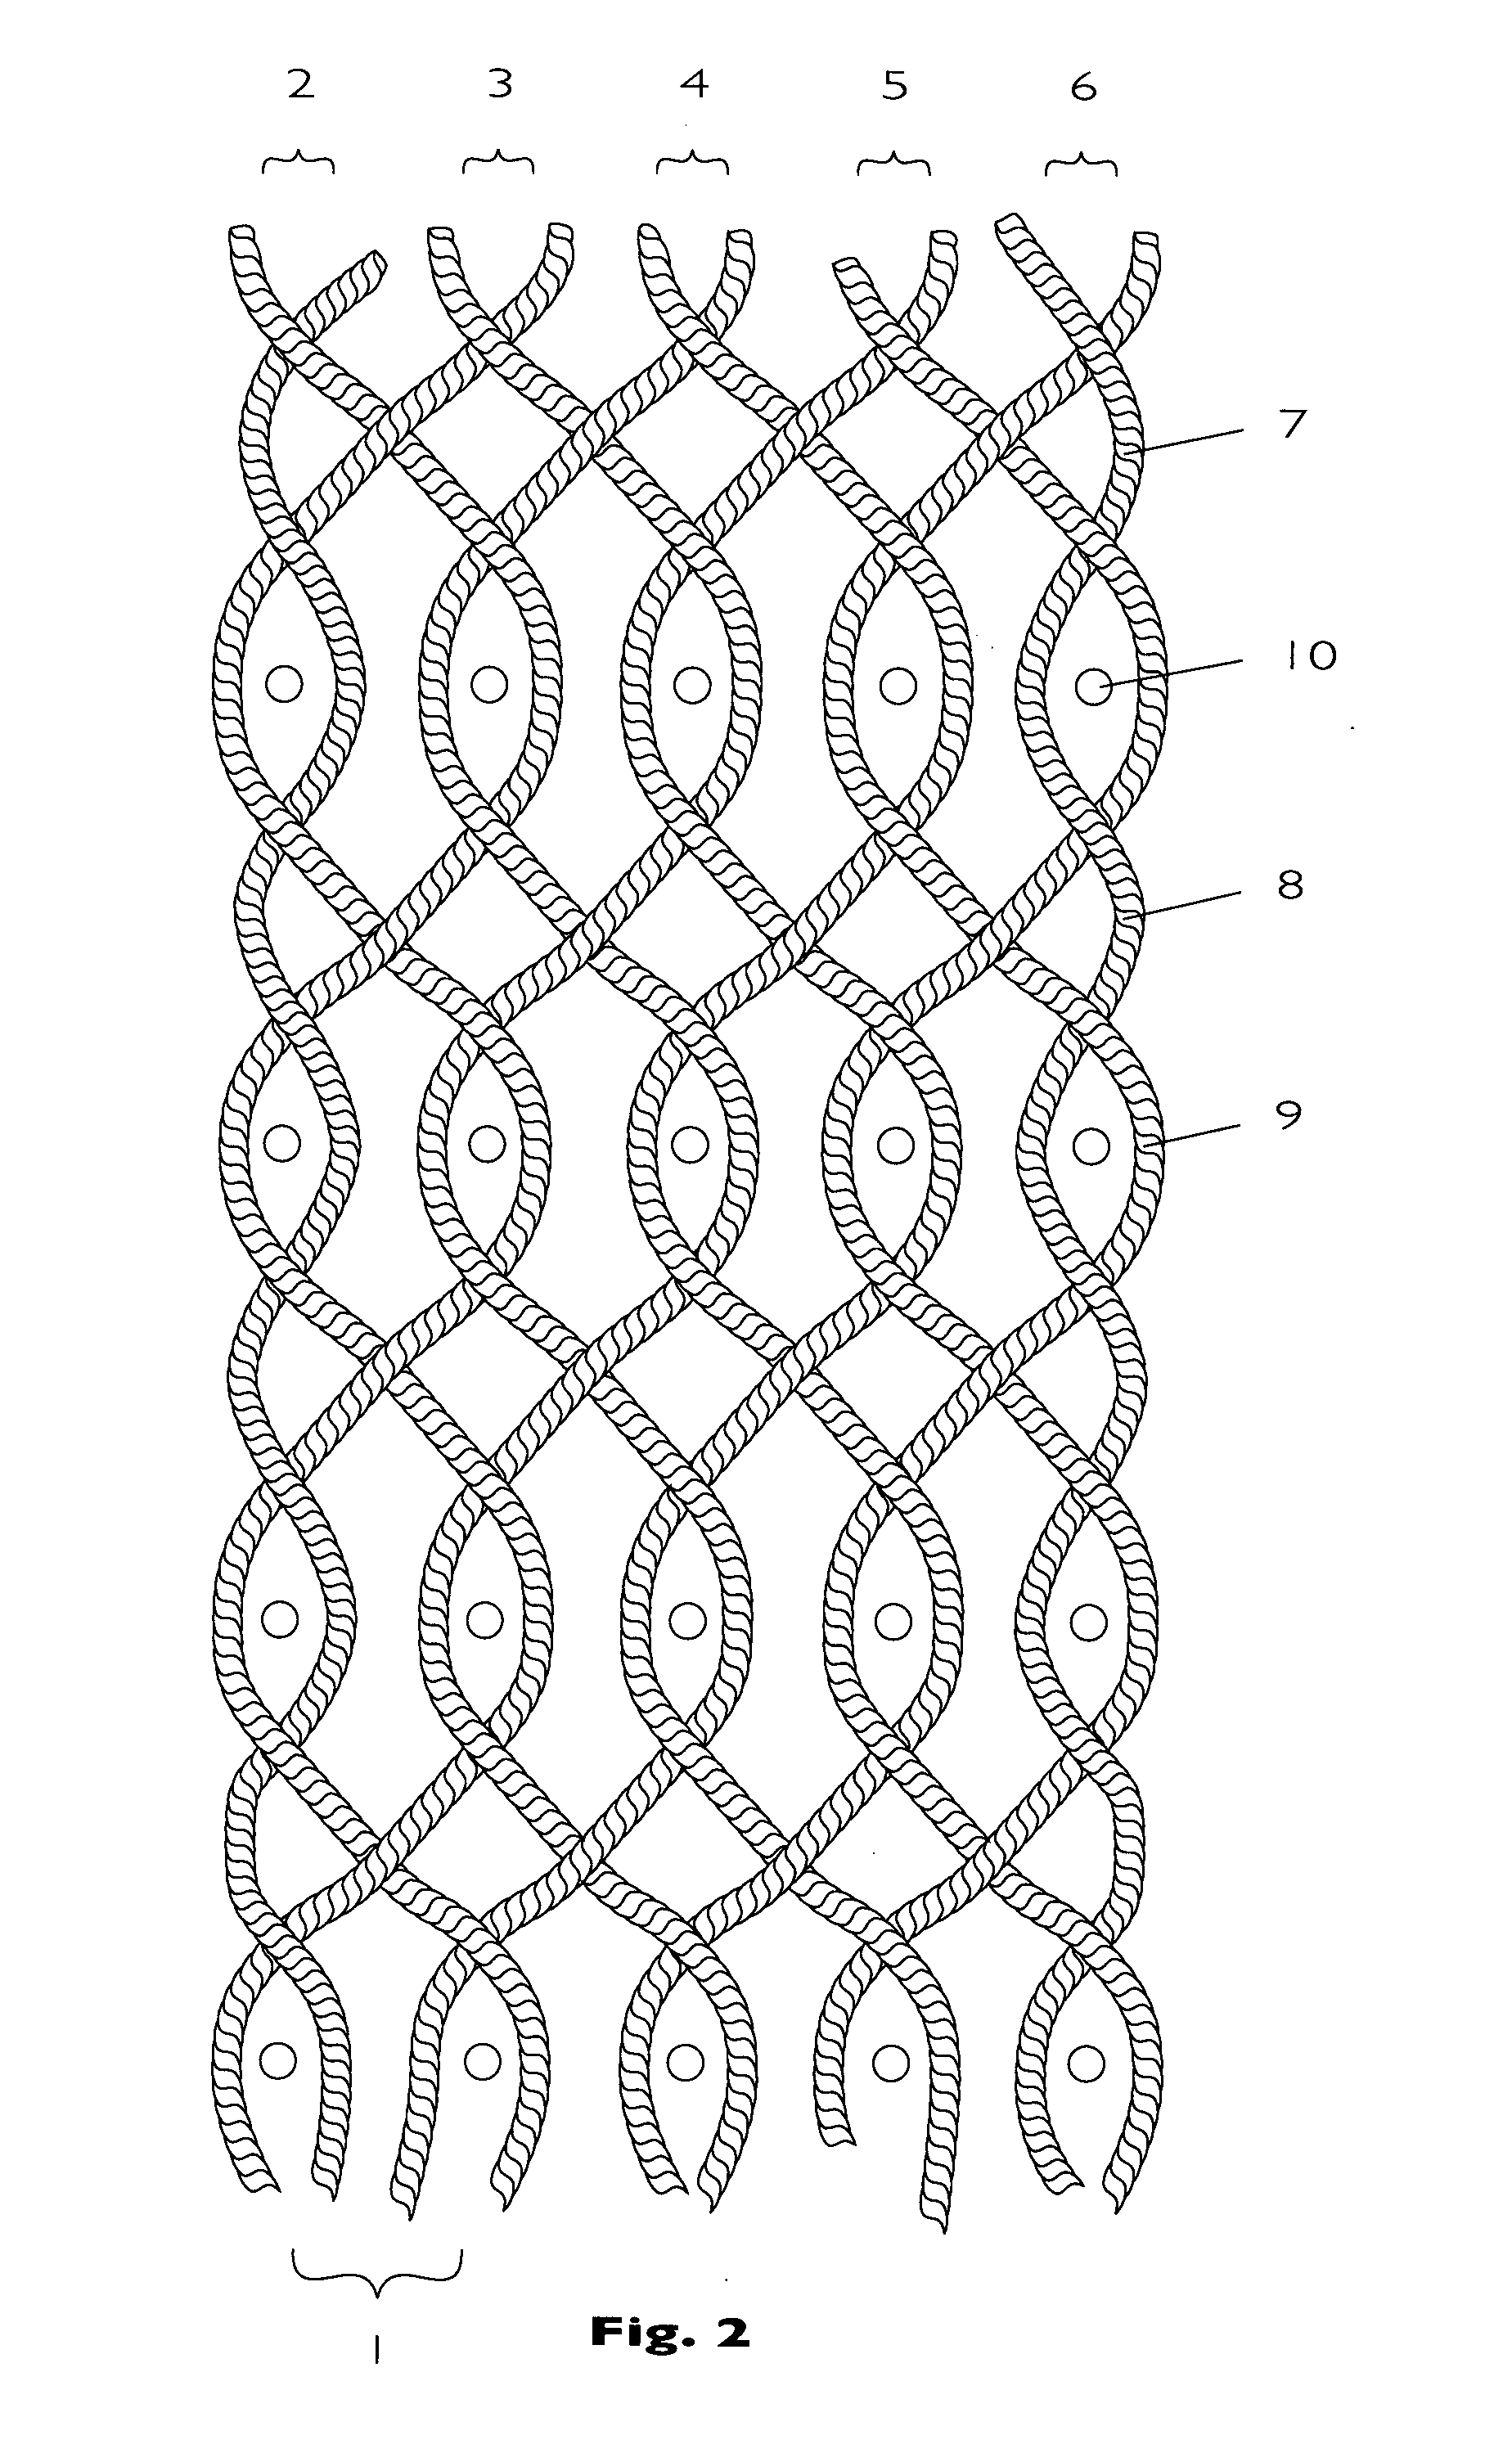 Method for treatment of spider silk-filament for use as thread or a composition in the manufacture of cosmetic, medical, textile or industrial applications such as bio-artificial cell tissue or skin based on (recombinant) spider silk